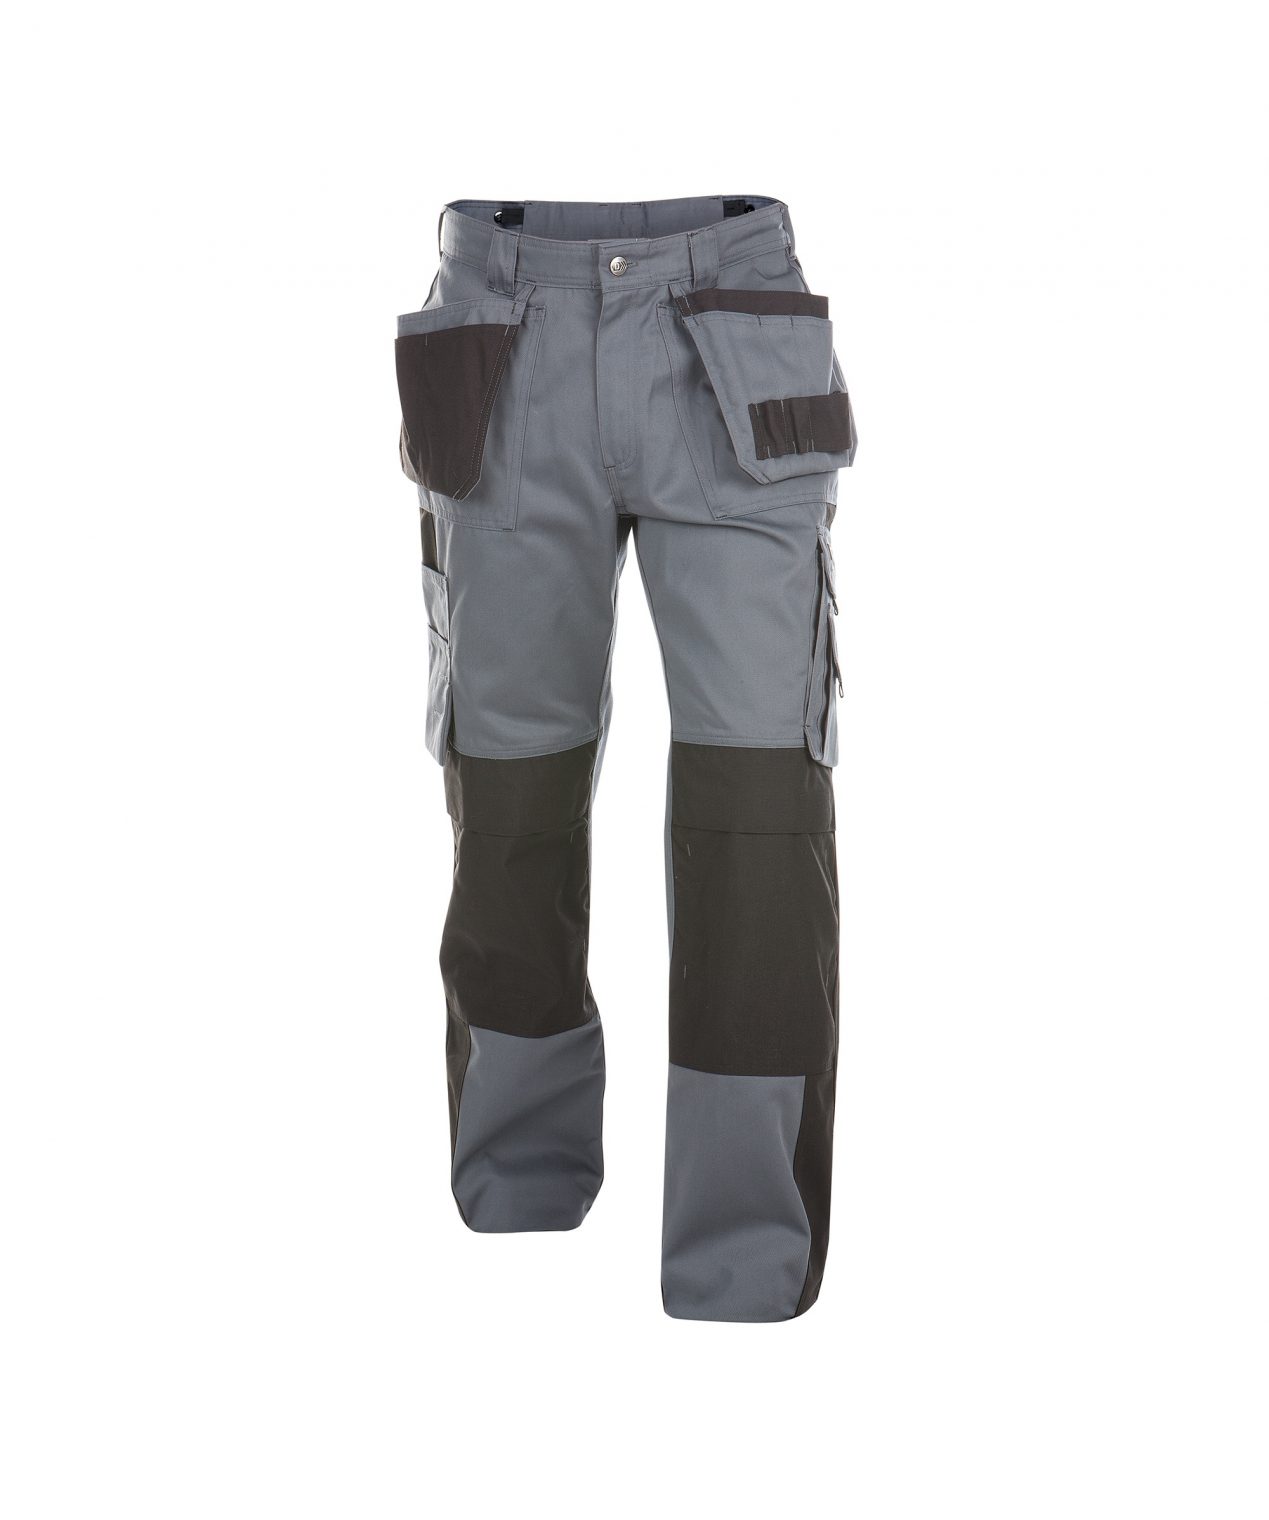 seattle two tone trousers with holster pockets and knee pockets cement grey black front